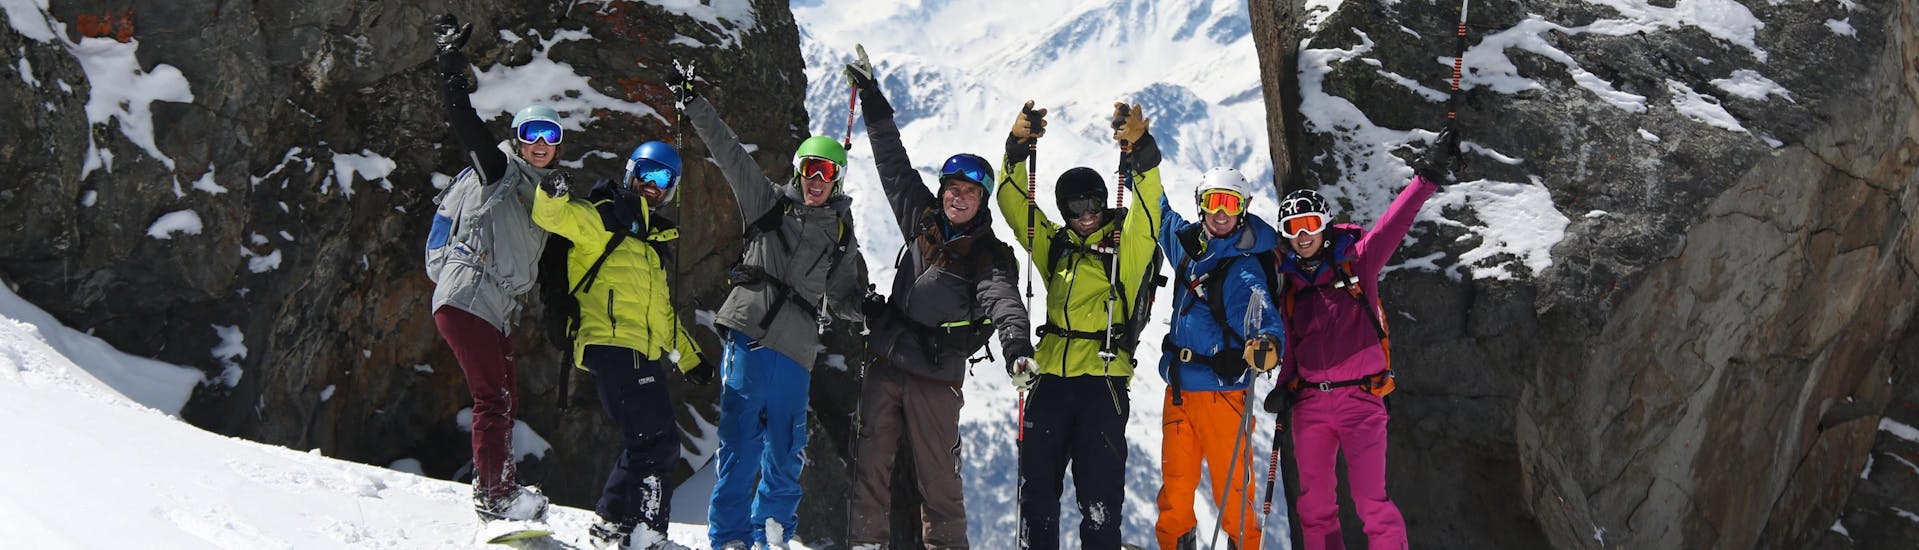 A snowboarder is having fun with his friends during the Private Snowboarding Lessons - High Season - All Ages that a team of professional instructors from Prosneige Val d'Isère designed according to his needs.